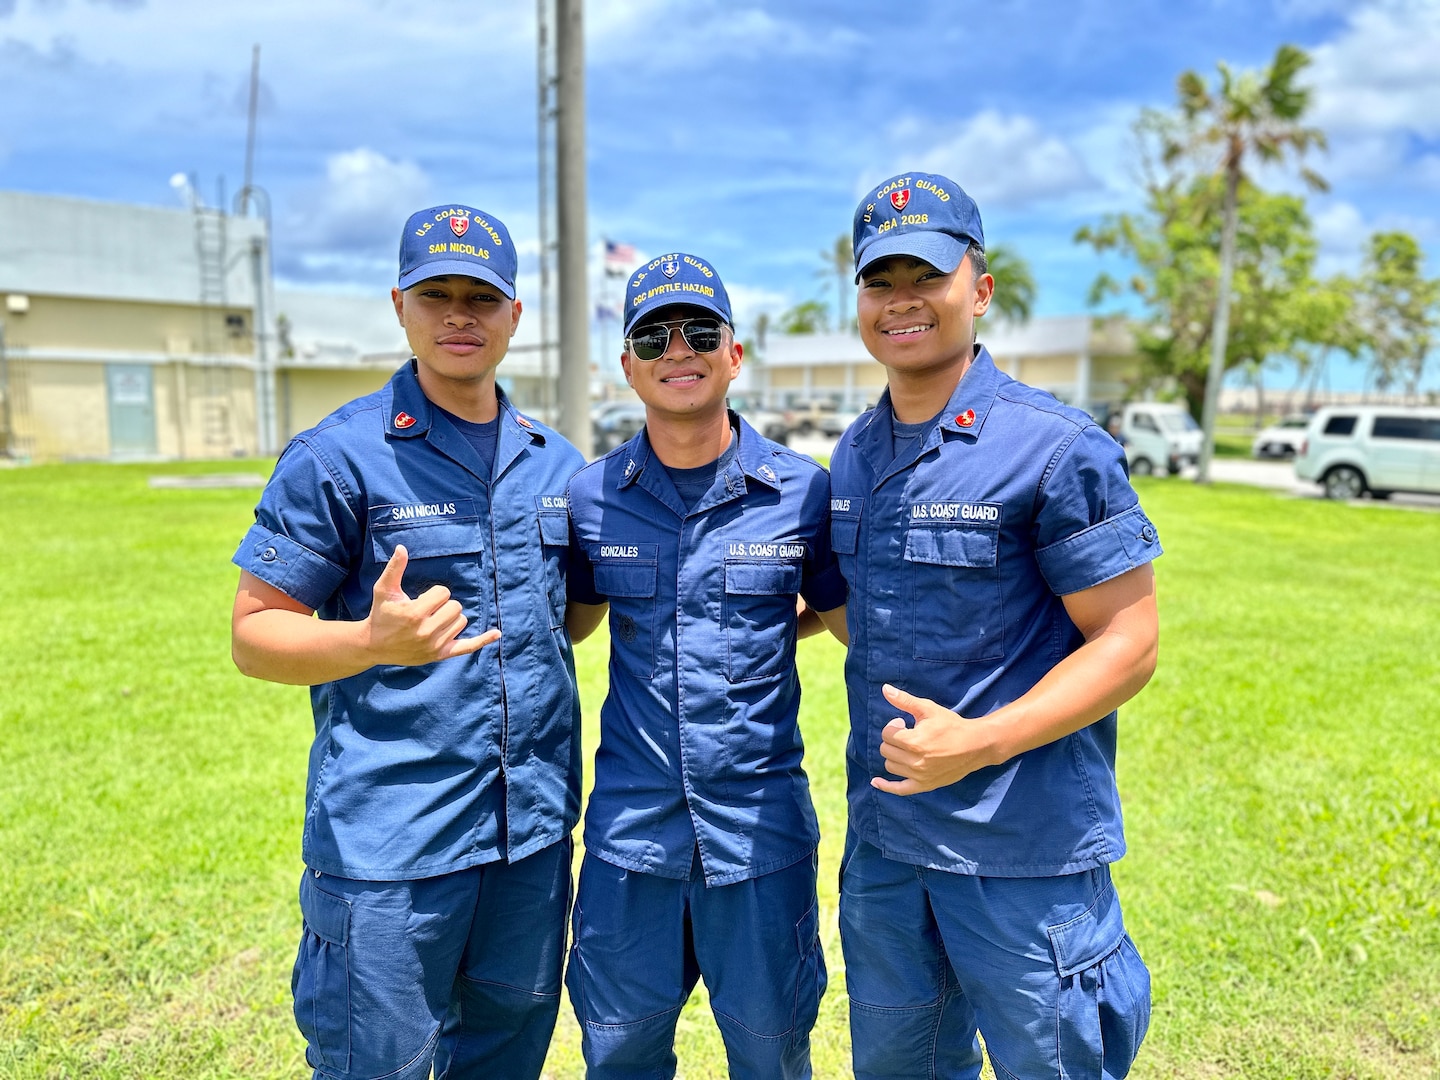 Cadets Genzo Gonzales, Seiji Gonzales, and Kyle San Nicolas of the U.S. Coast Guard Academy take a moment for a photo at a gathering following Typhoon Mawar in Guam on July 19, 2023. Bridging their love for the sea and cultural roots to the prestige of one of America's most renowned maritime institutions, the cadets spent their summer away in Guam. Cadet Noah Mesa also spent the summer in Guam but was underway on the USCGC Oliver Henry at the time of this photo. (U.S. Coast Guard photo by Chief Warrant Officer Sara Muir)